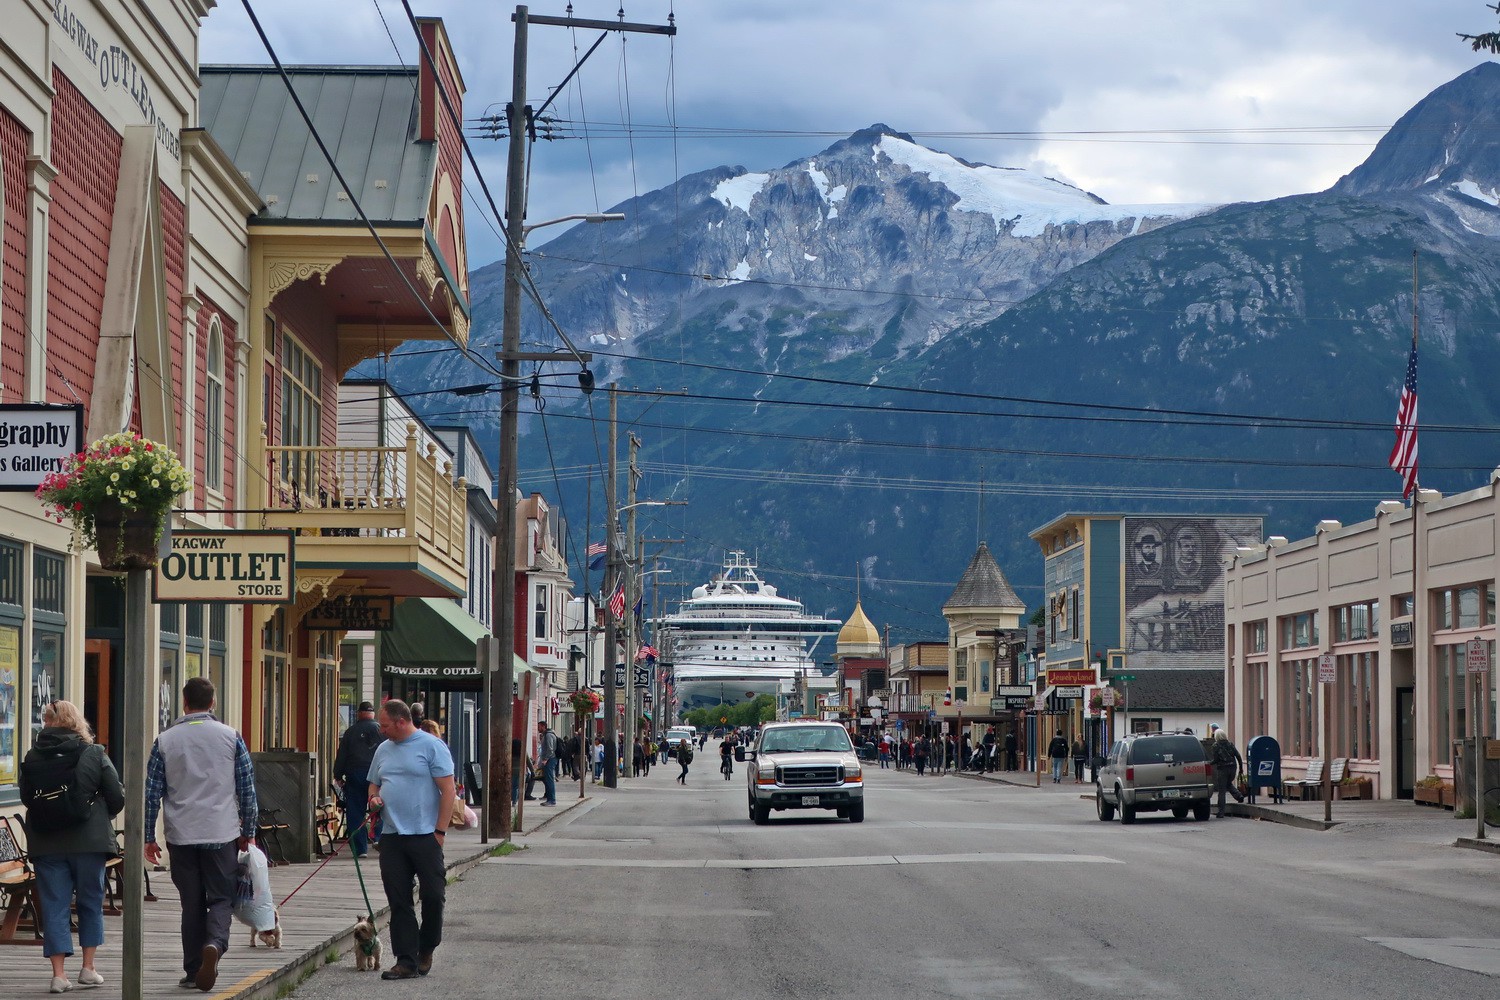 Main street of Skagway which is the gateway to the Klondike Gold Rush of 1898